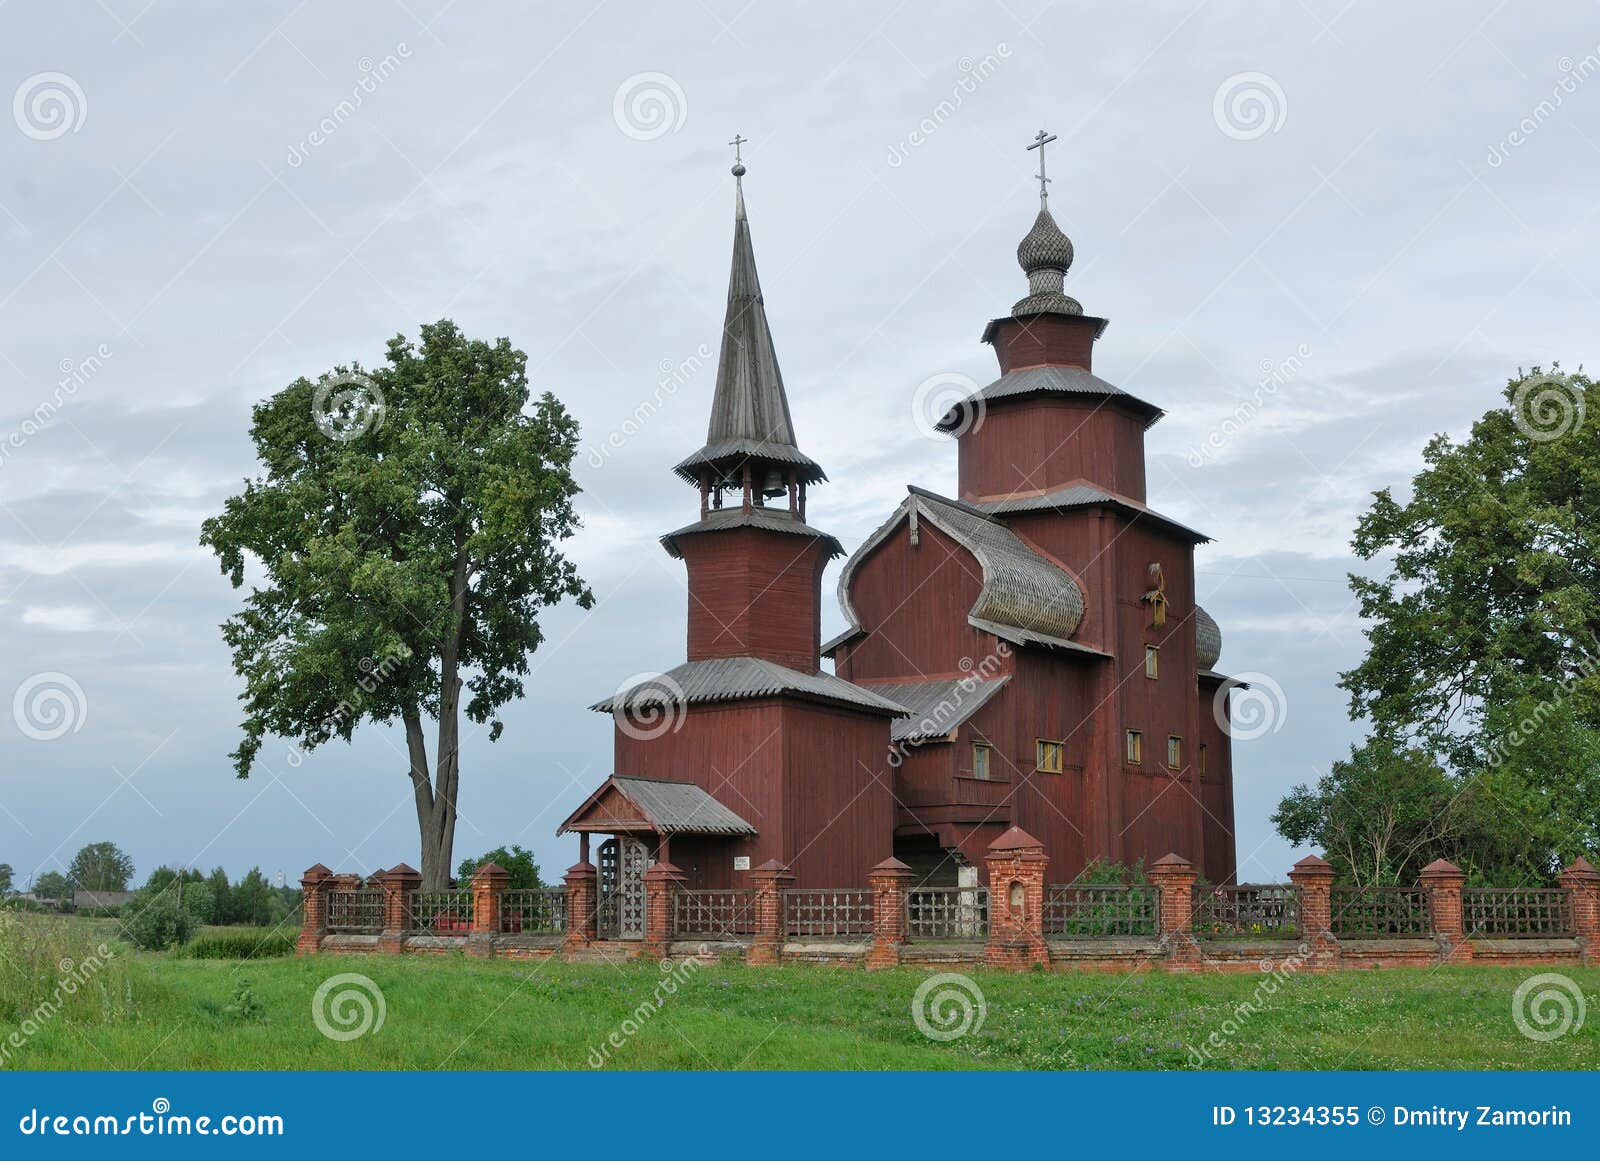 russia. town of rostov the great. wooden church